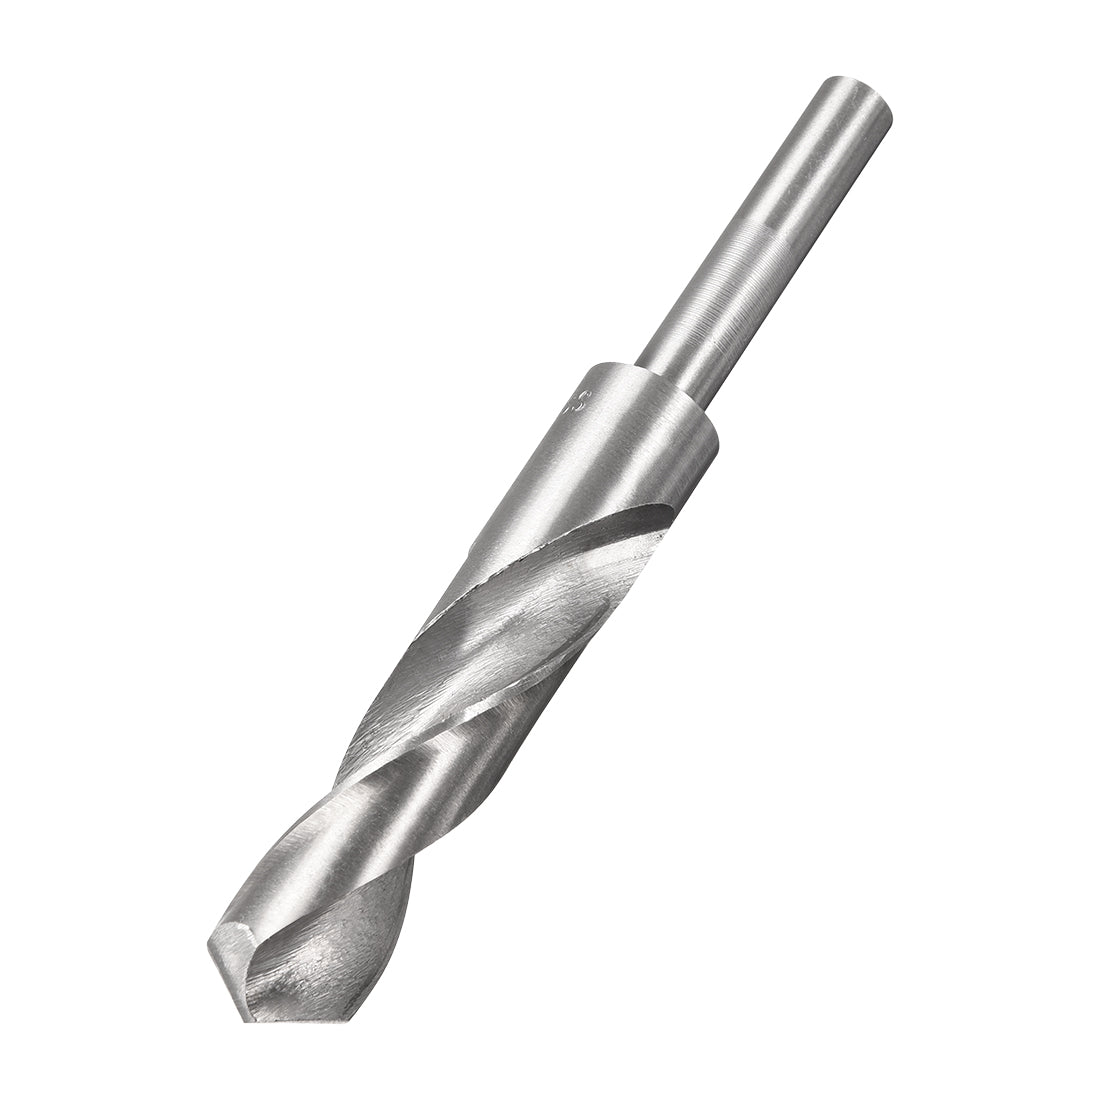 uxcell Uxcell 19.5mm Reduced Shank Drill Bit High Speed Steel 4241 with 1/2" Straight Shank